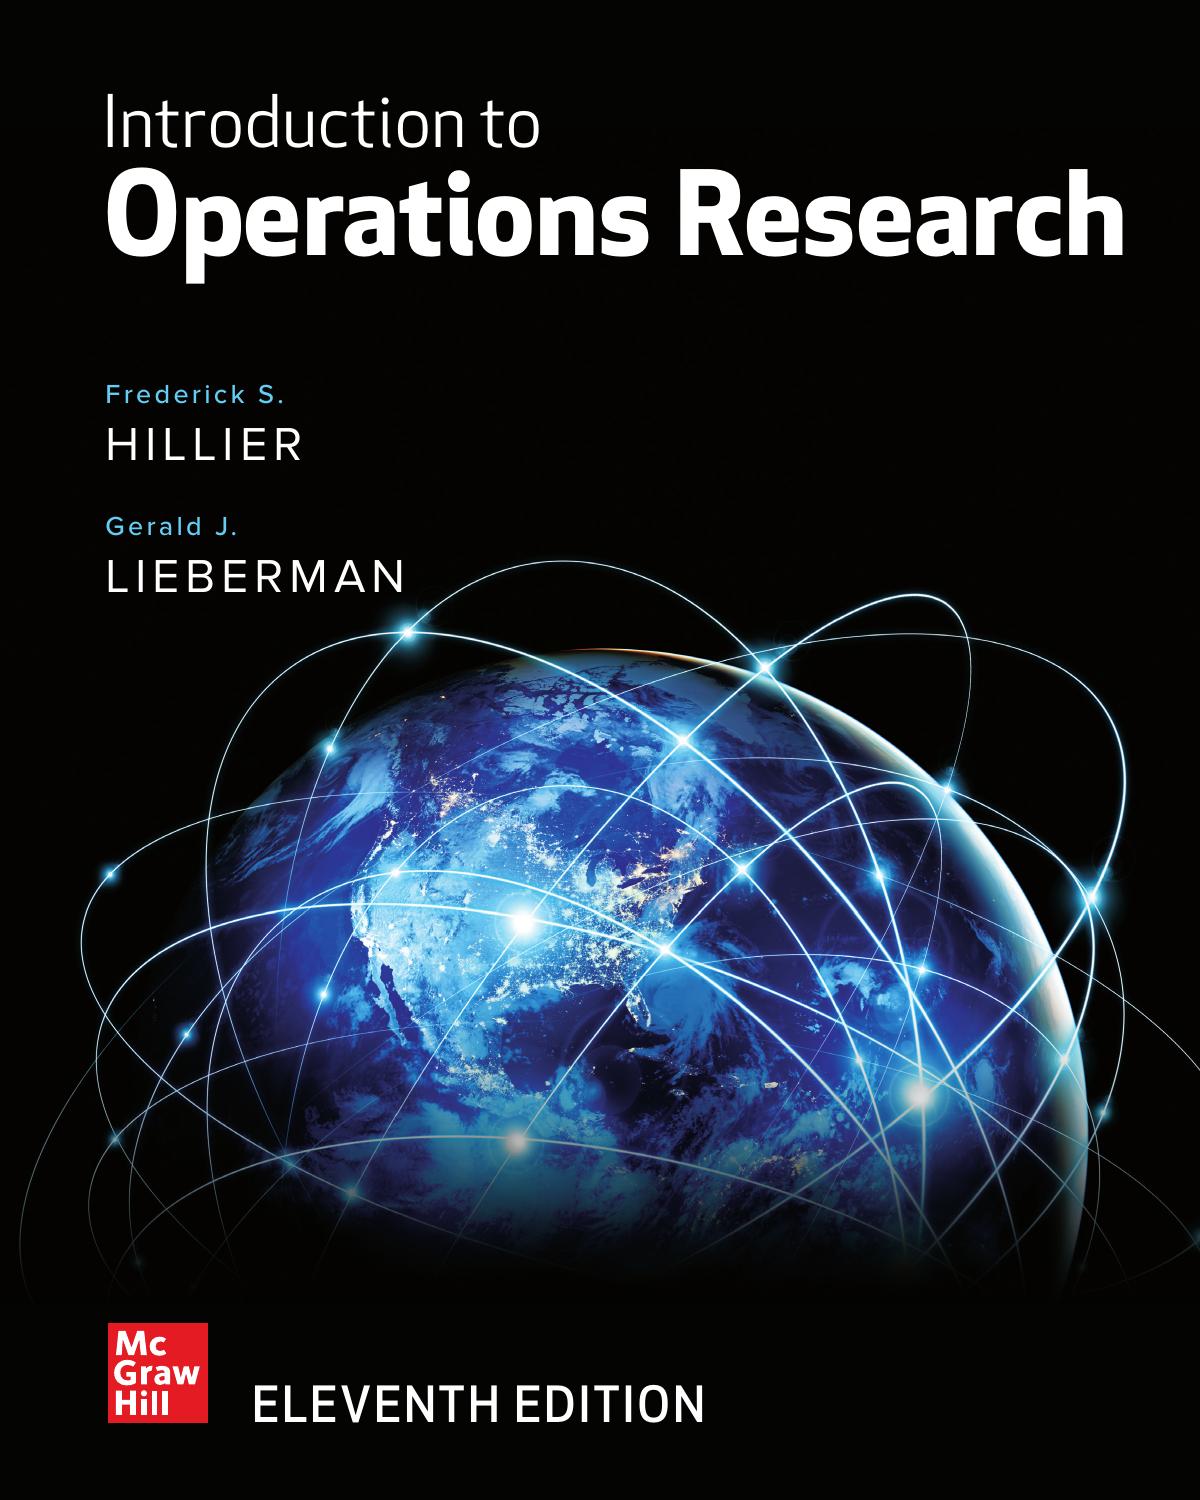 Test Bank for Introduction to Operations Research Eleventh Edition by Frederick S. Hillier, Gerald J. Lieberman